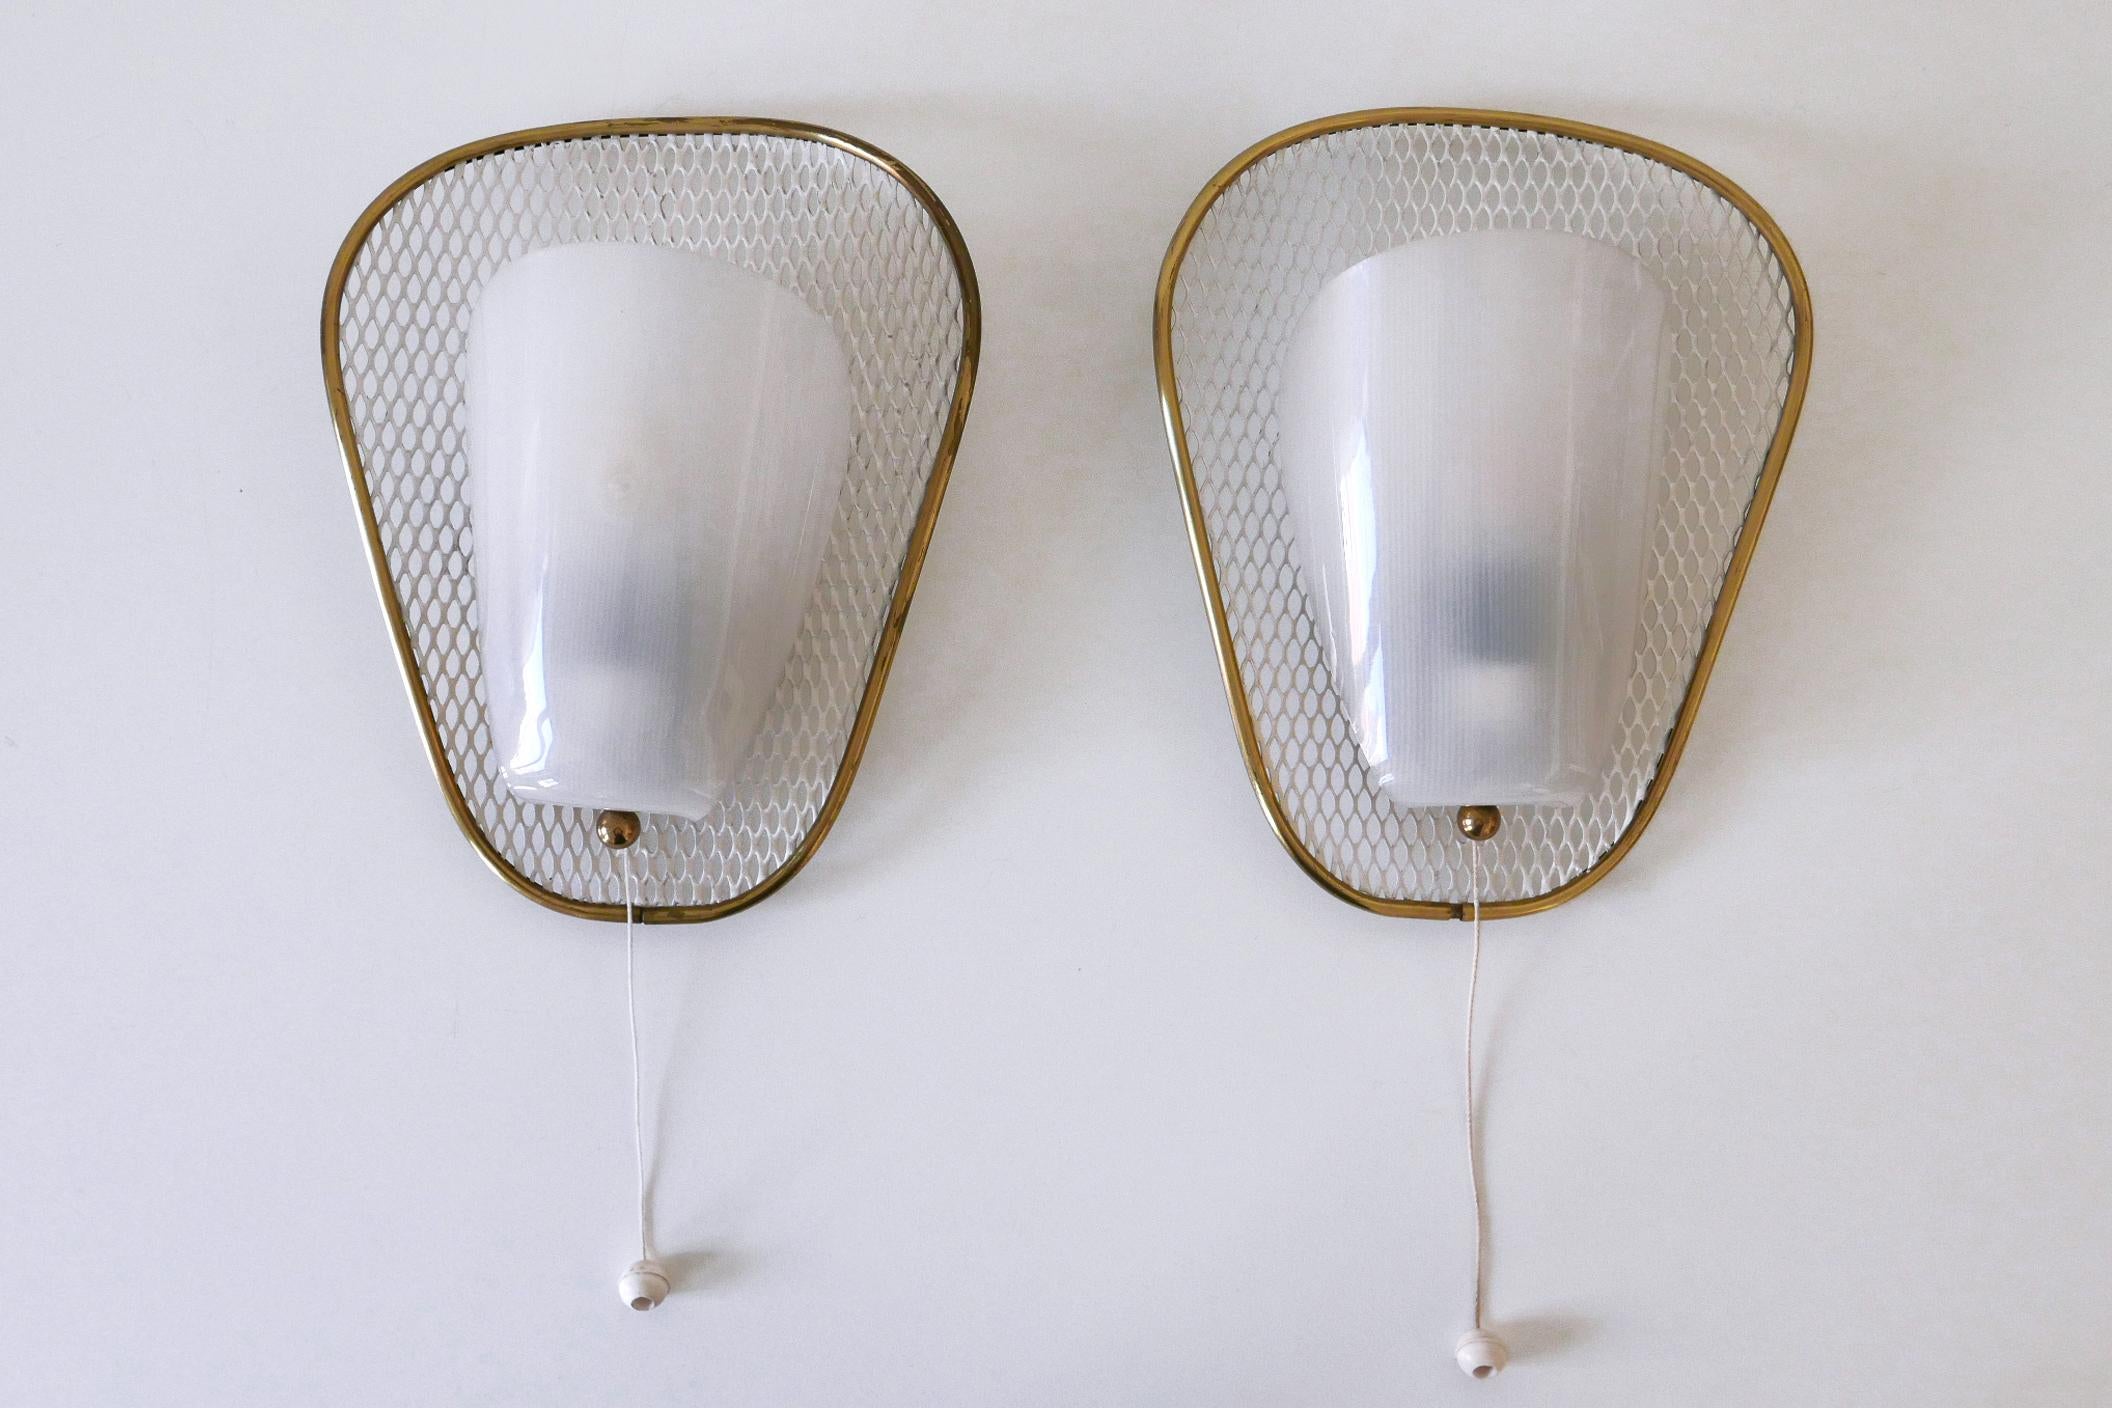 Set of Two Rare & Elegant Mid-Century Modern Sconces or Wall Lamps Germany 1950s For Sale 2